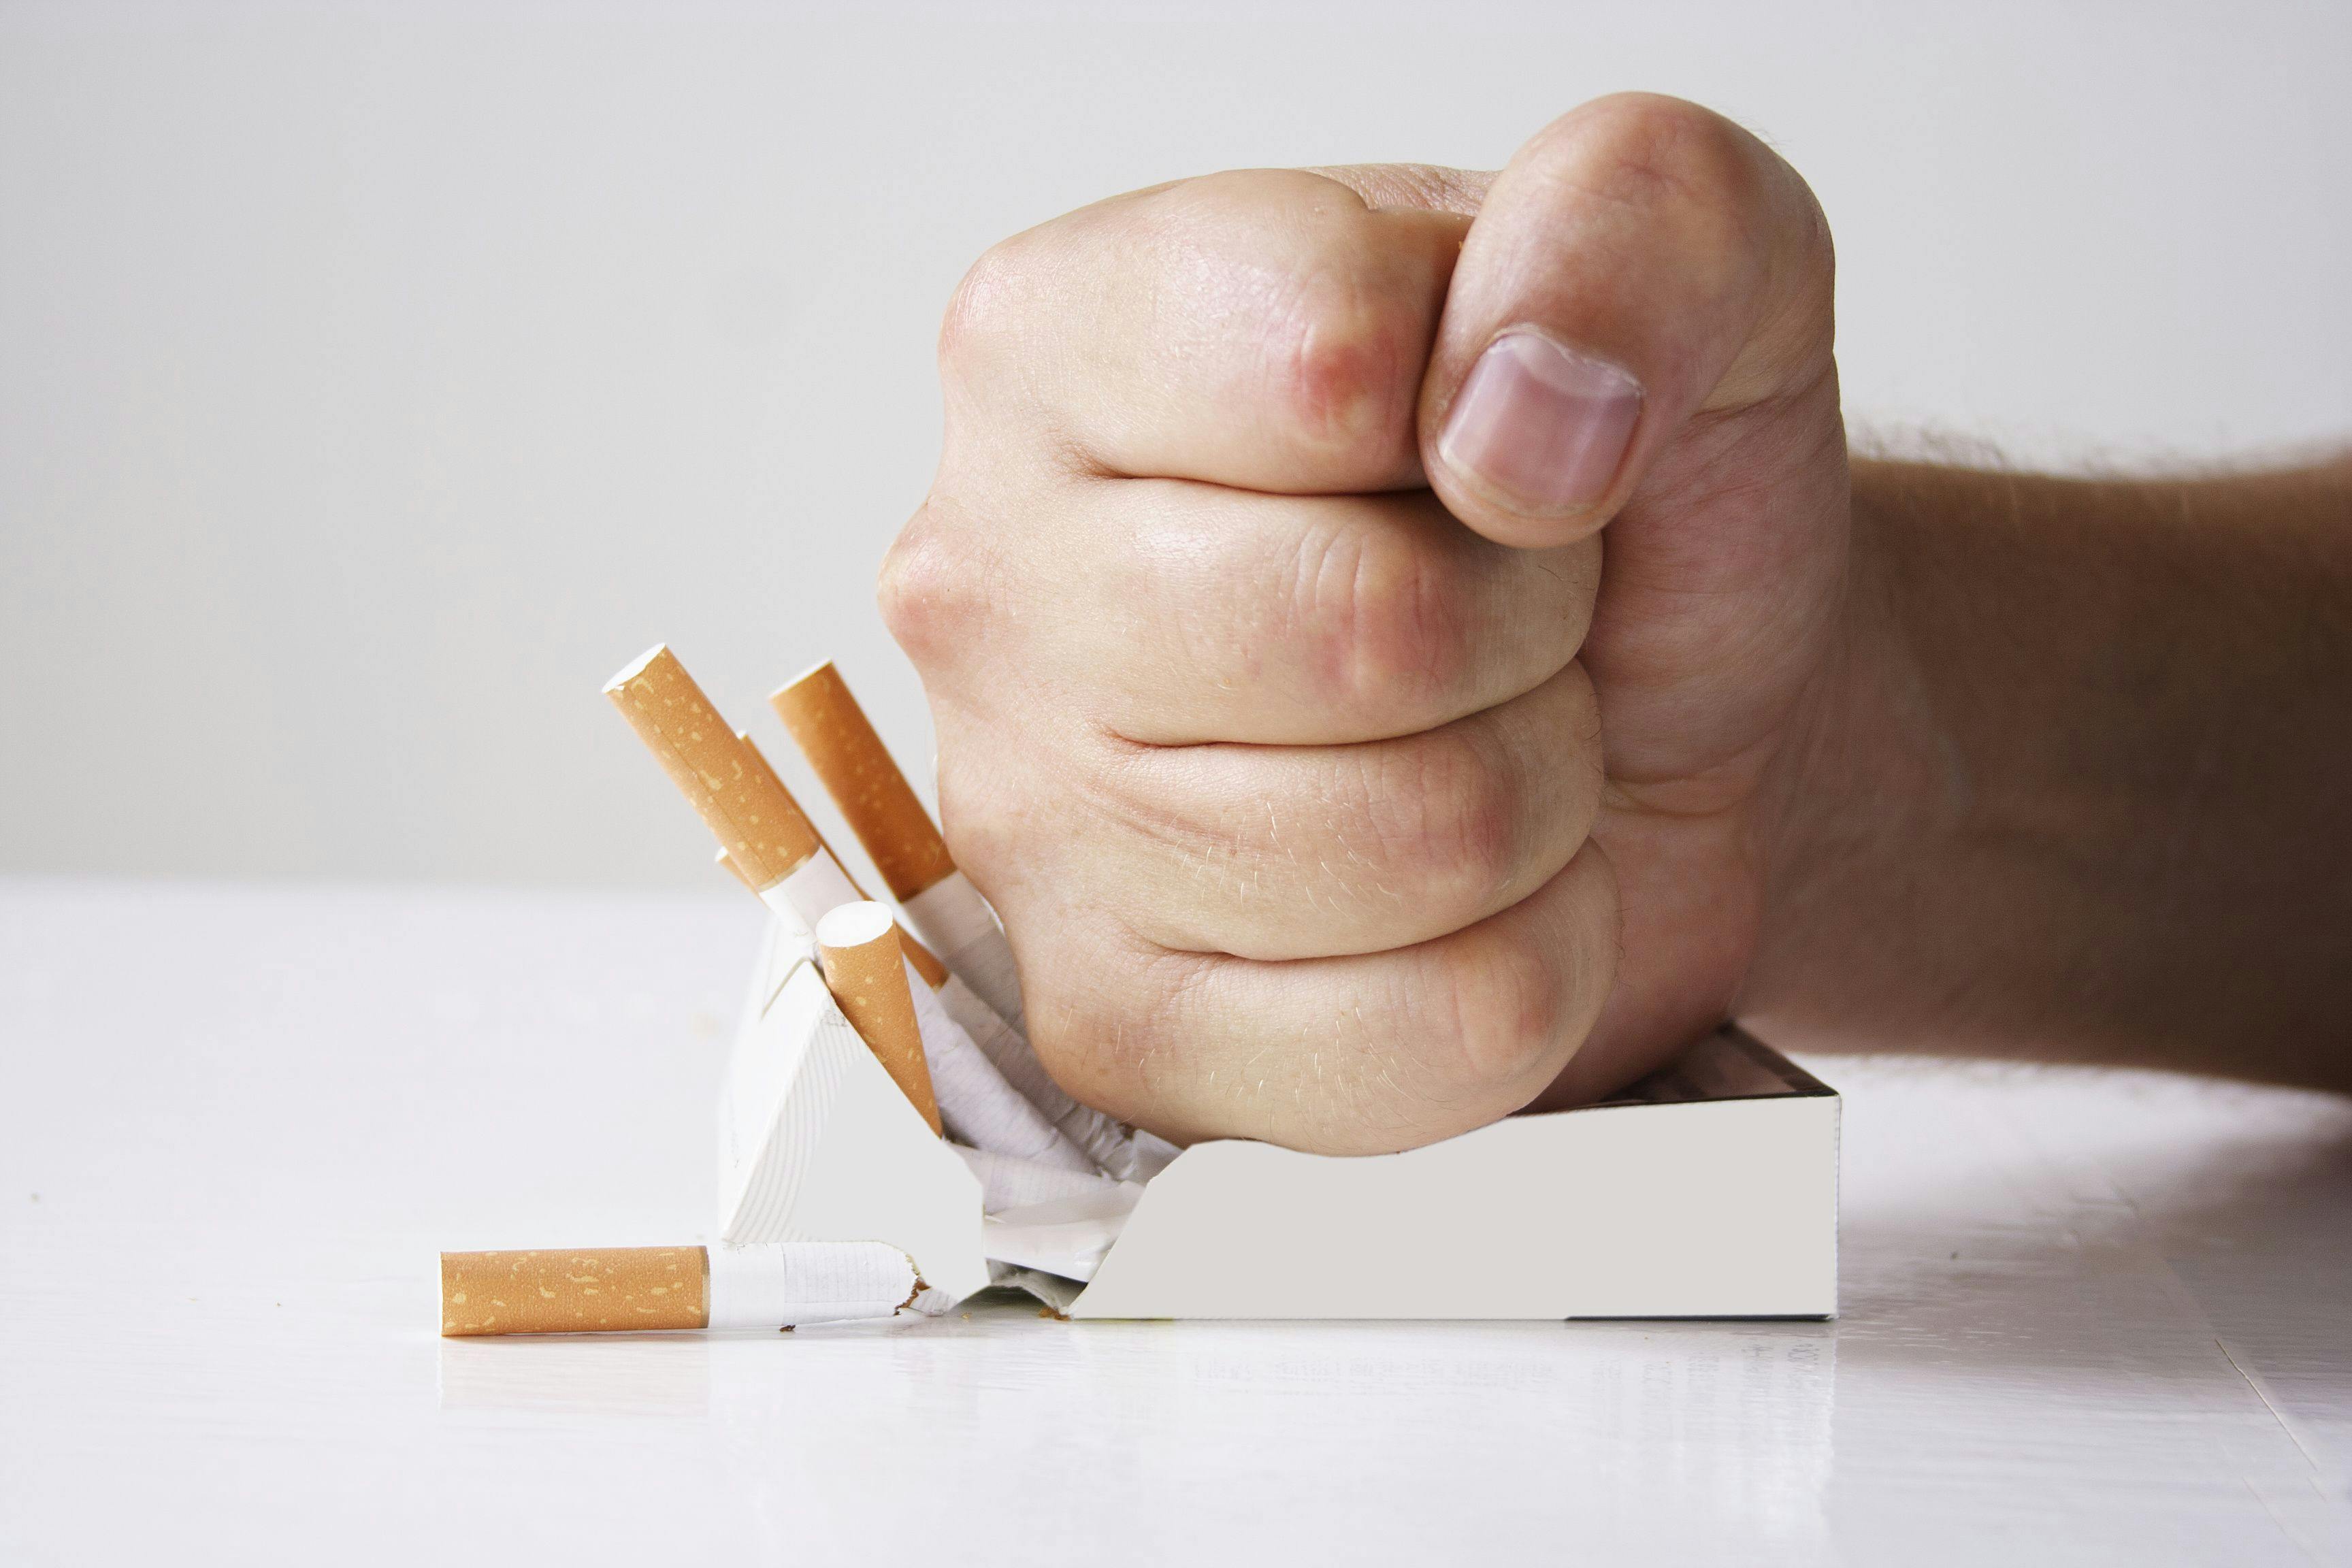 Smoking, Insurance Coverage Show Link in Those With Mental Health Disorders, SUD